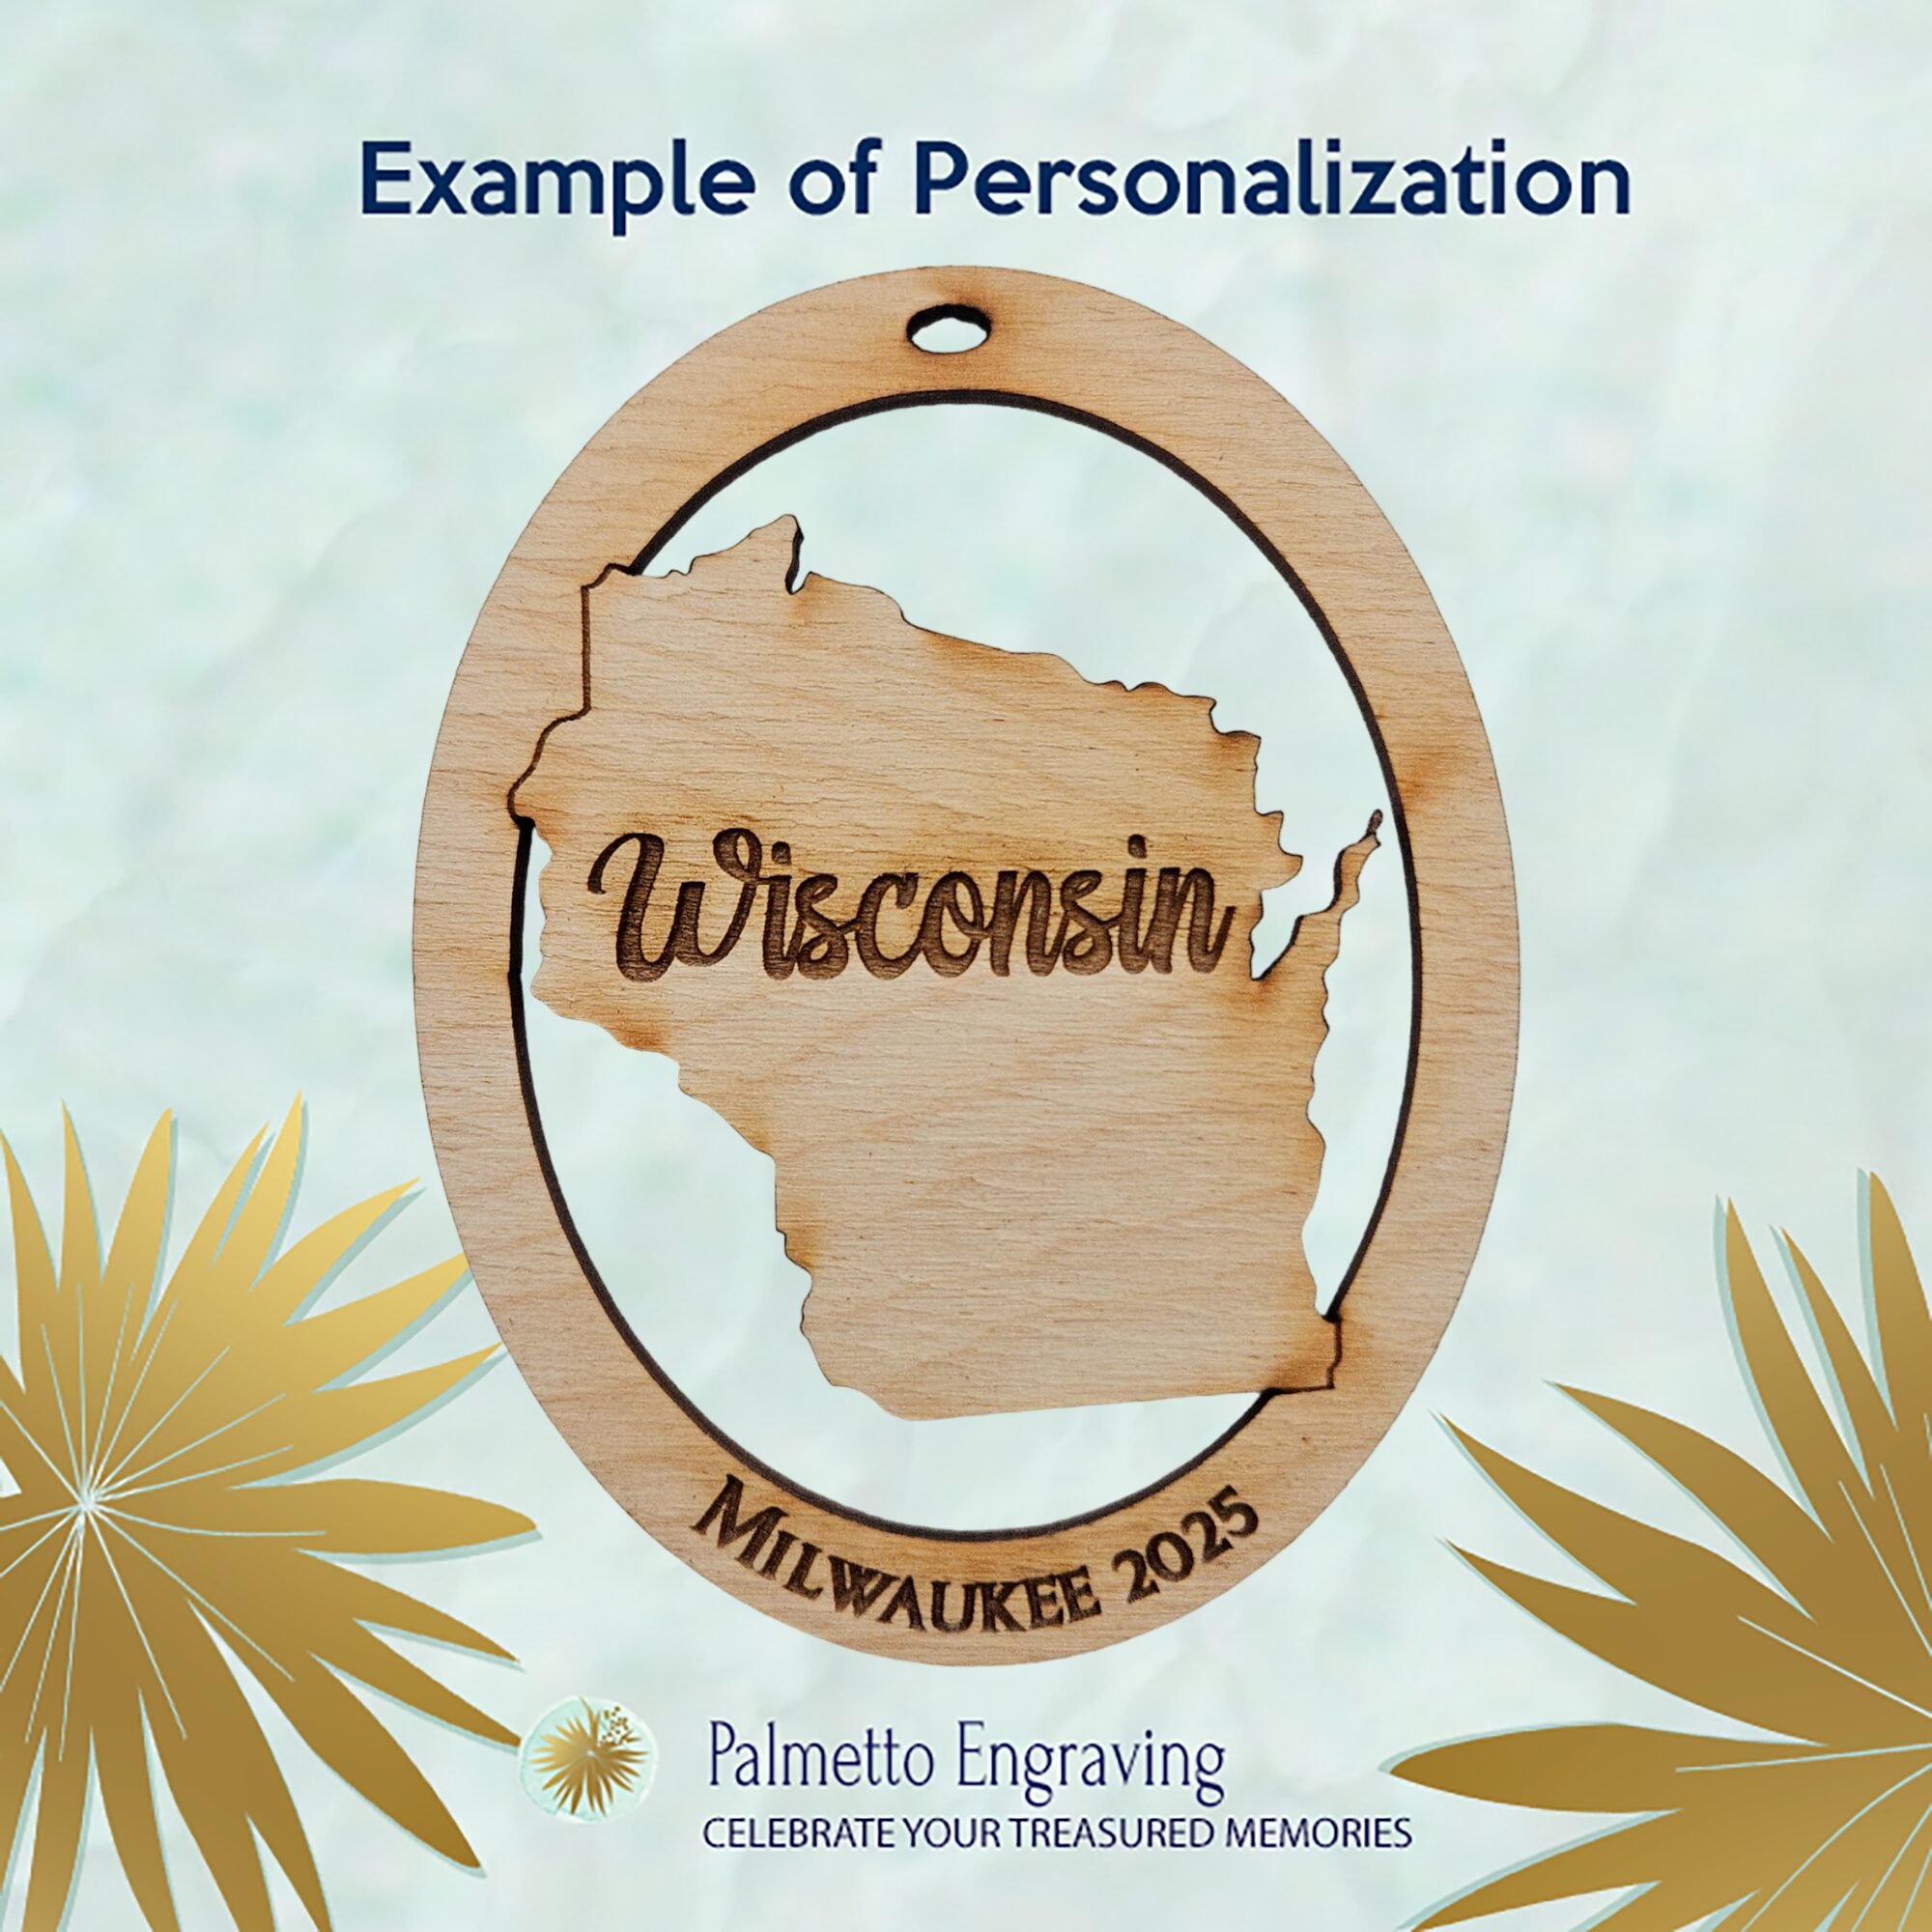 Wisconsin Gifts and Souvenirs